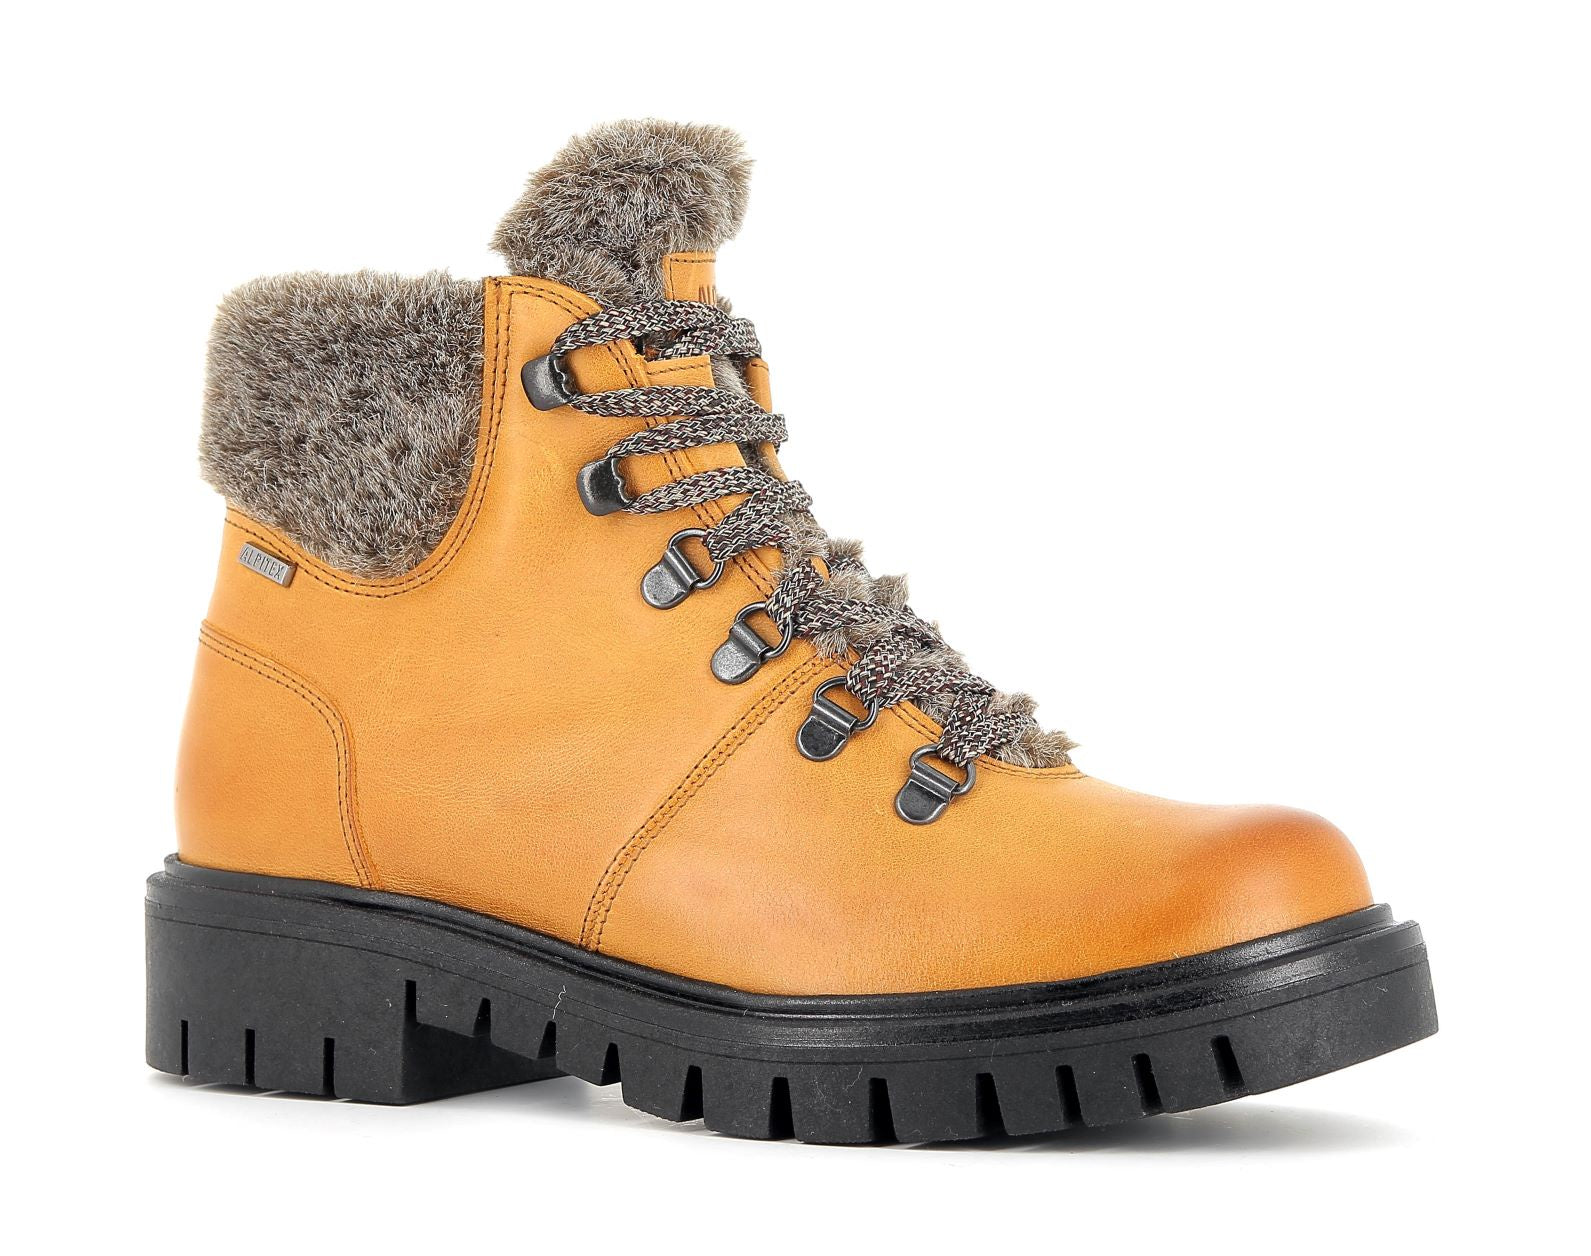 Alpina Amica 7L22-2 Mustard Yellow Wool Lined Water Resistant Lace Up Walking Boots - elevate your sole